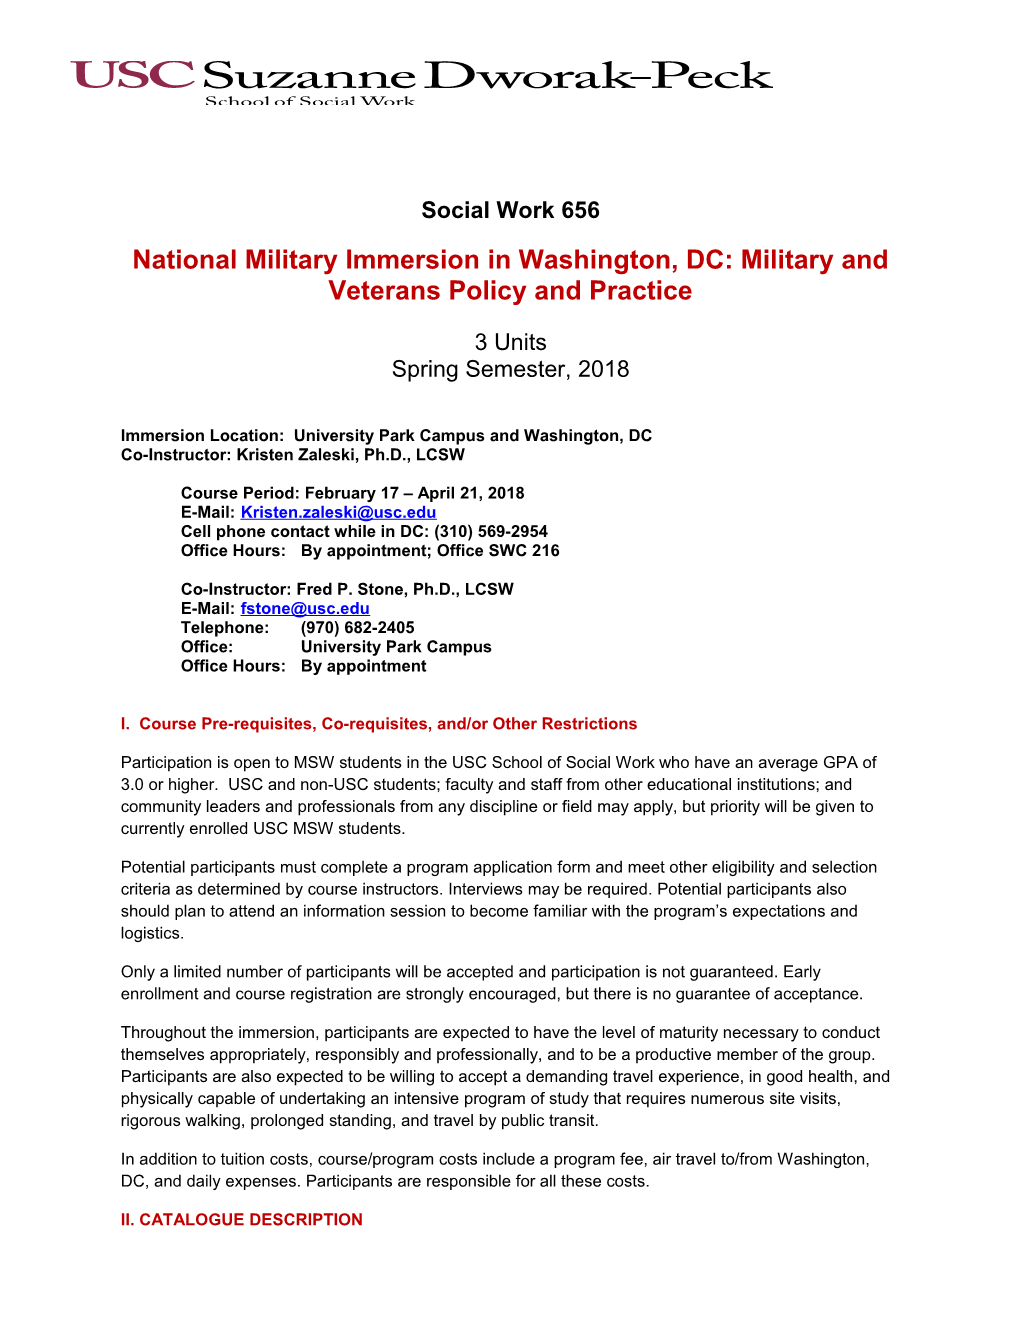 National Military Immersion in Washington, DC: Military and Veterans Policy and Practice